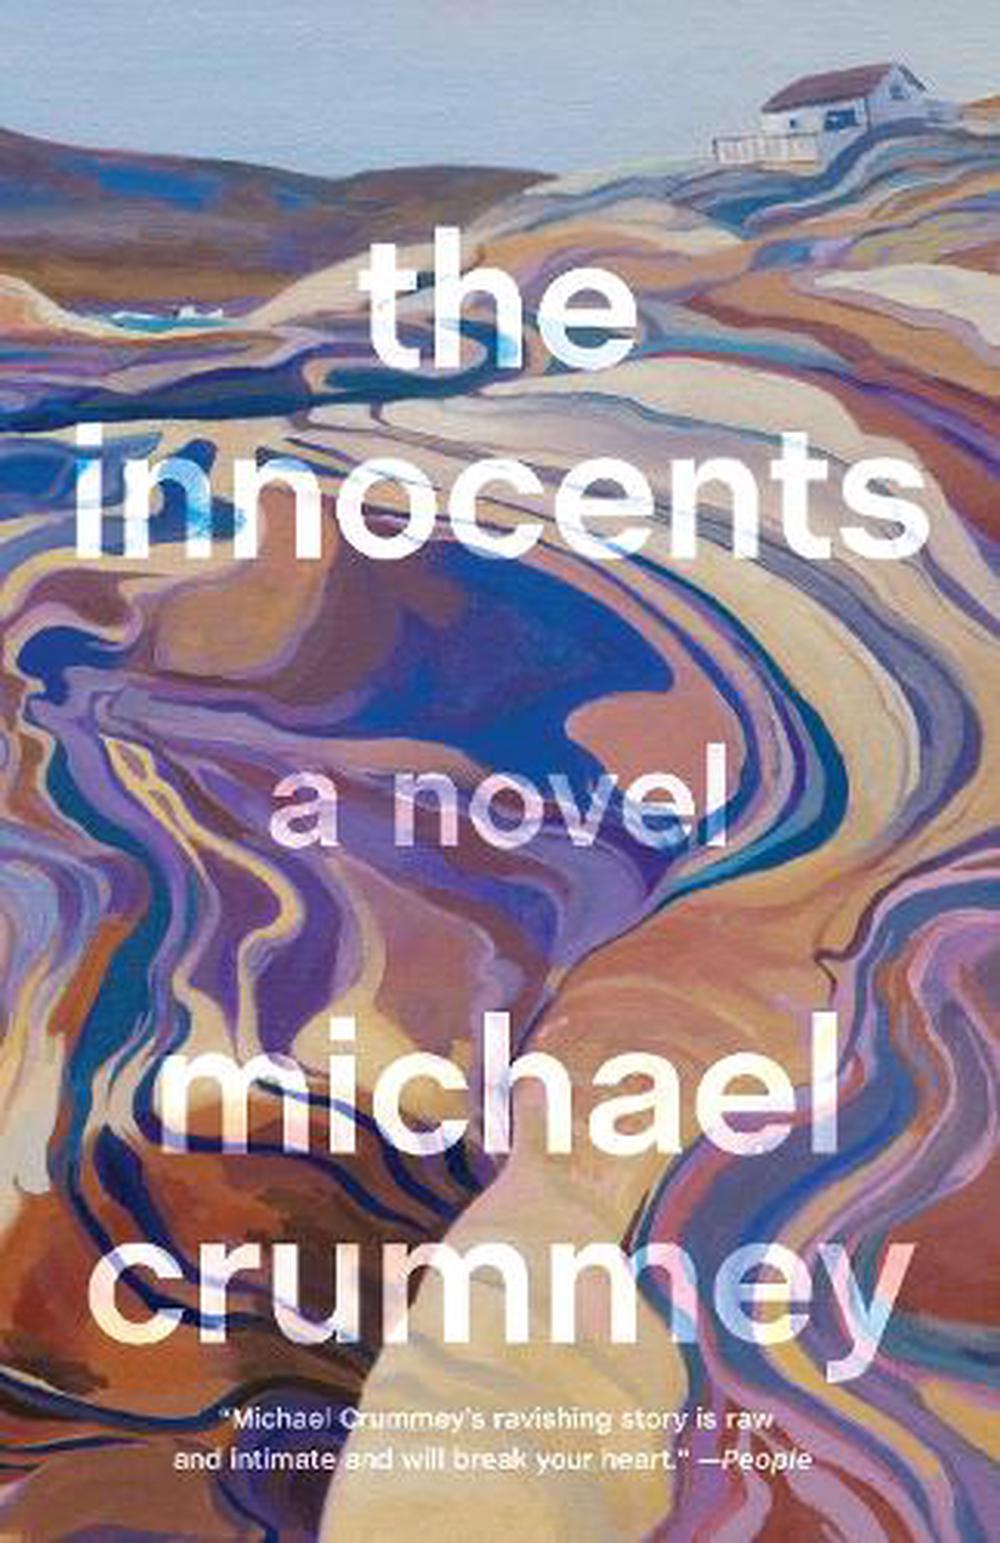 the innocents crummey review